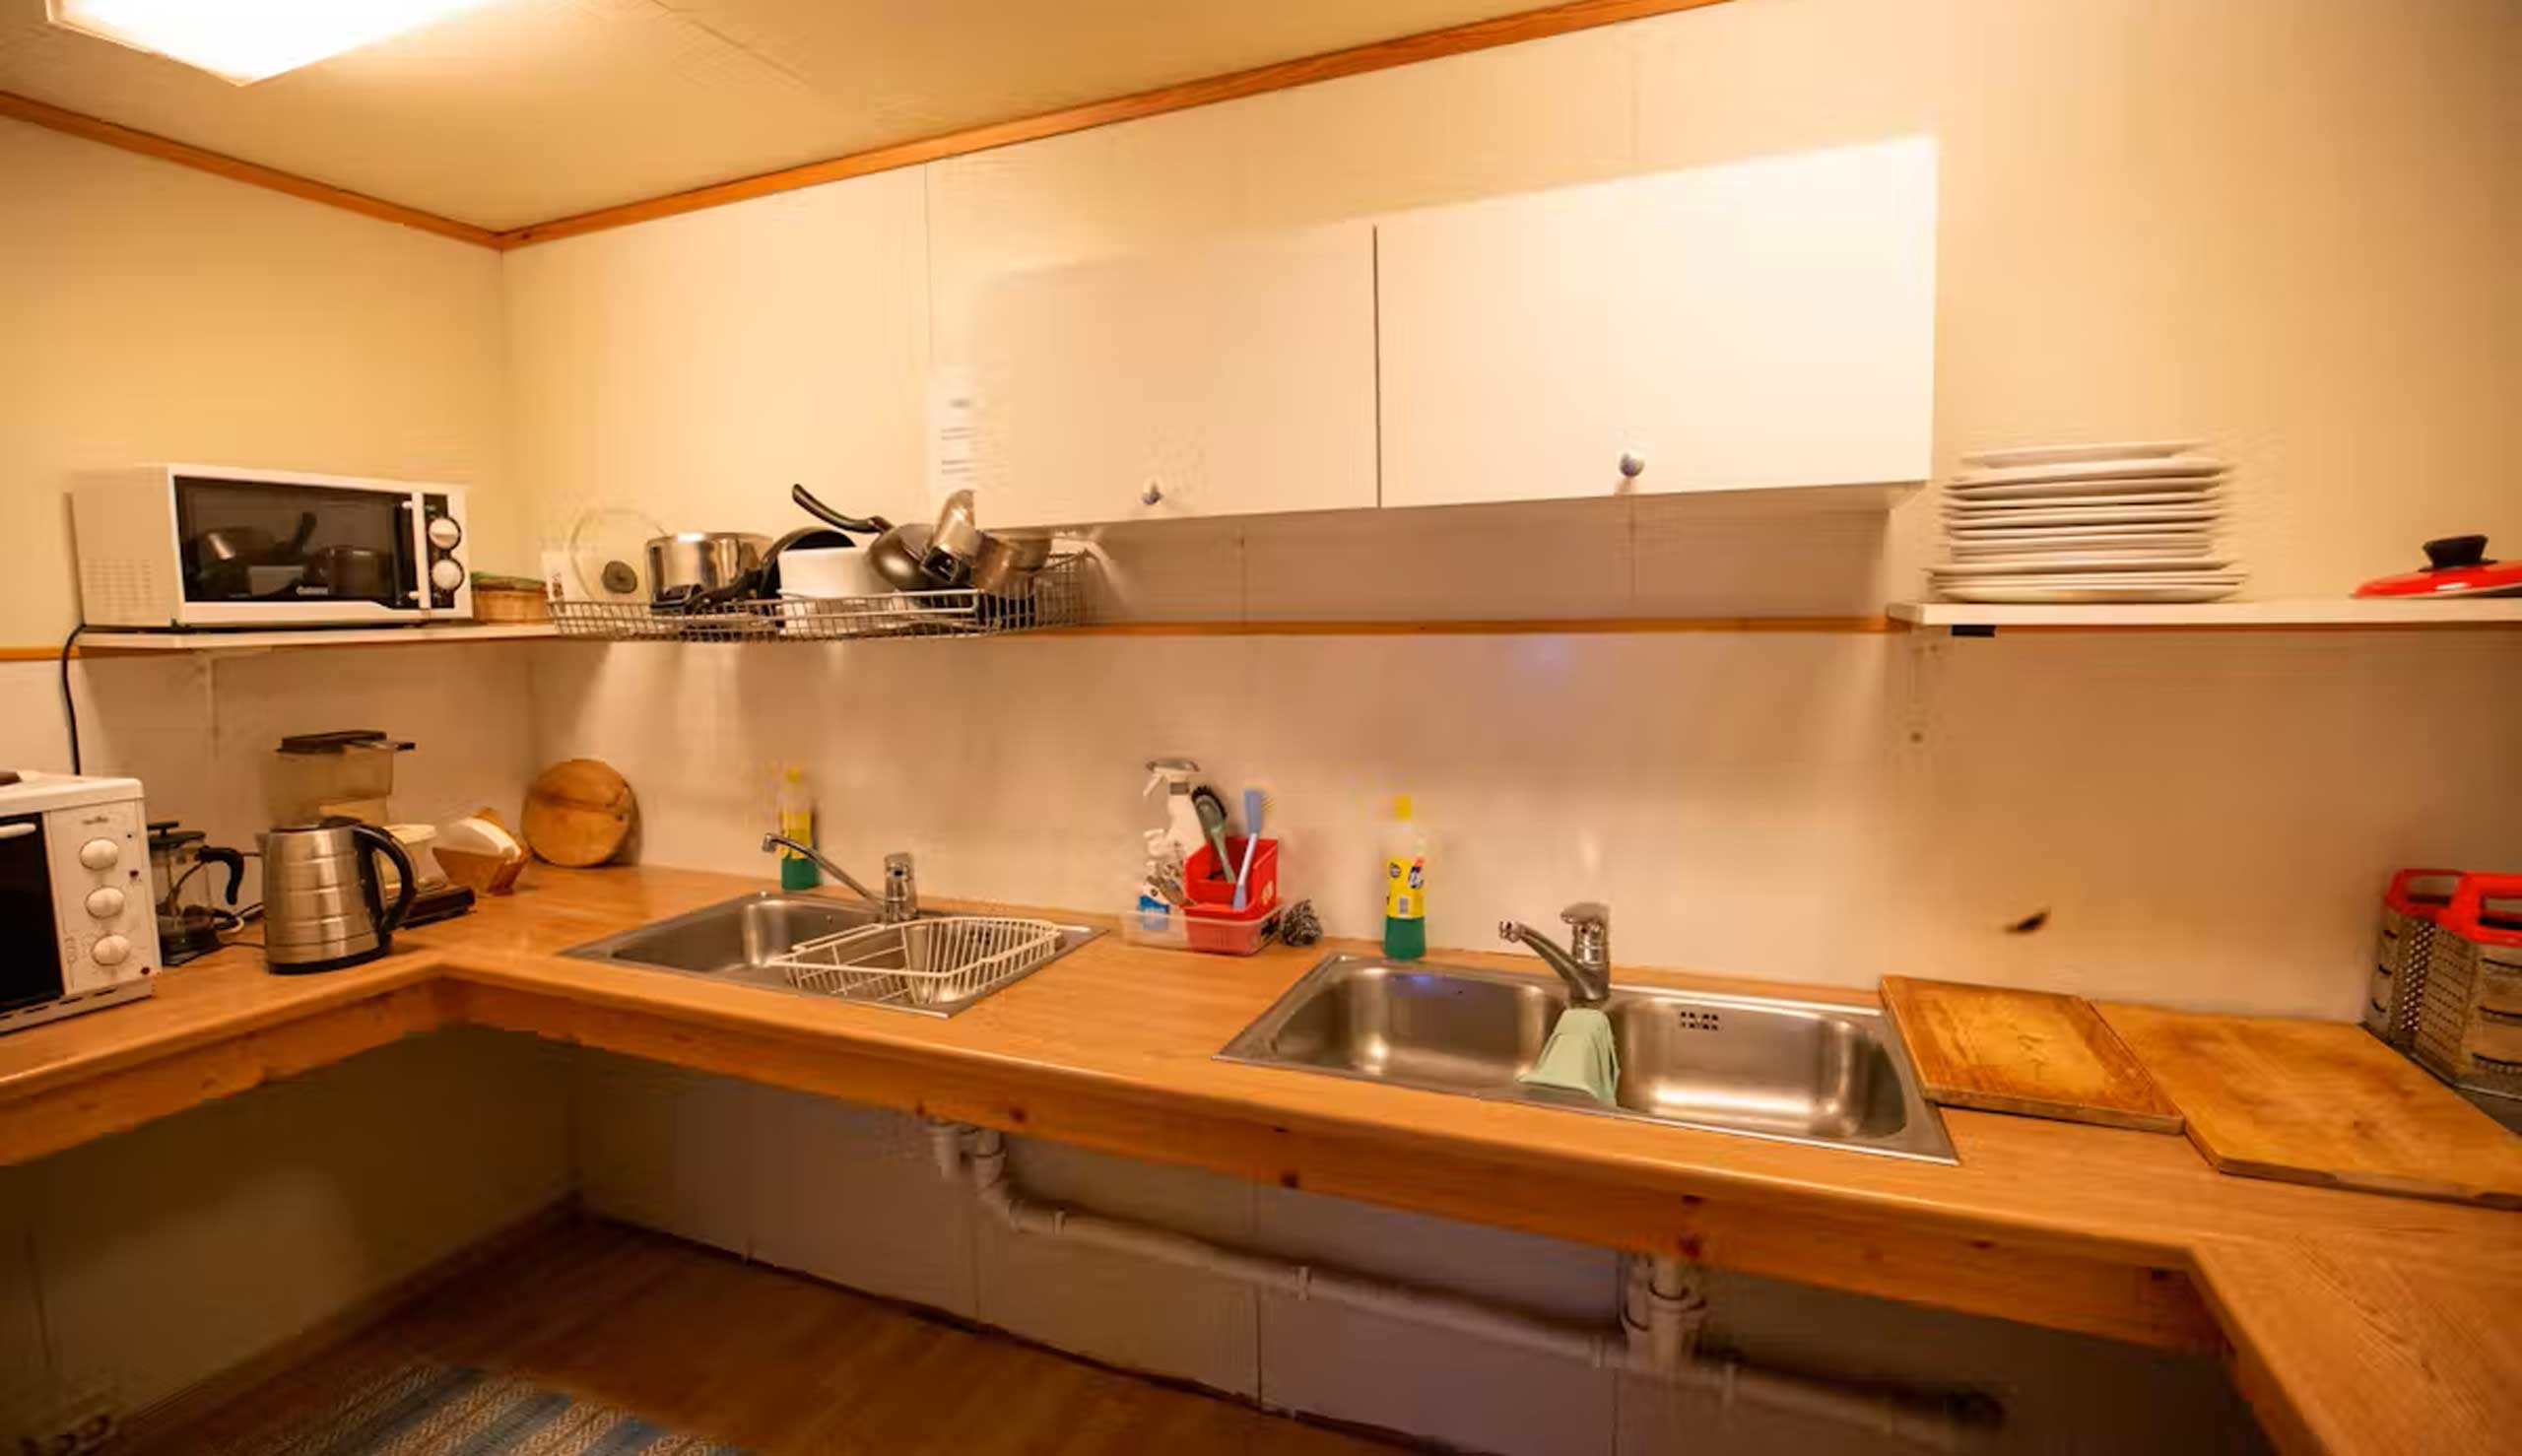 At BaseCamp North Cape you will find a well-equipped kitchen. Copyright: Pincamp.de